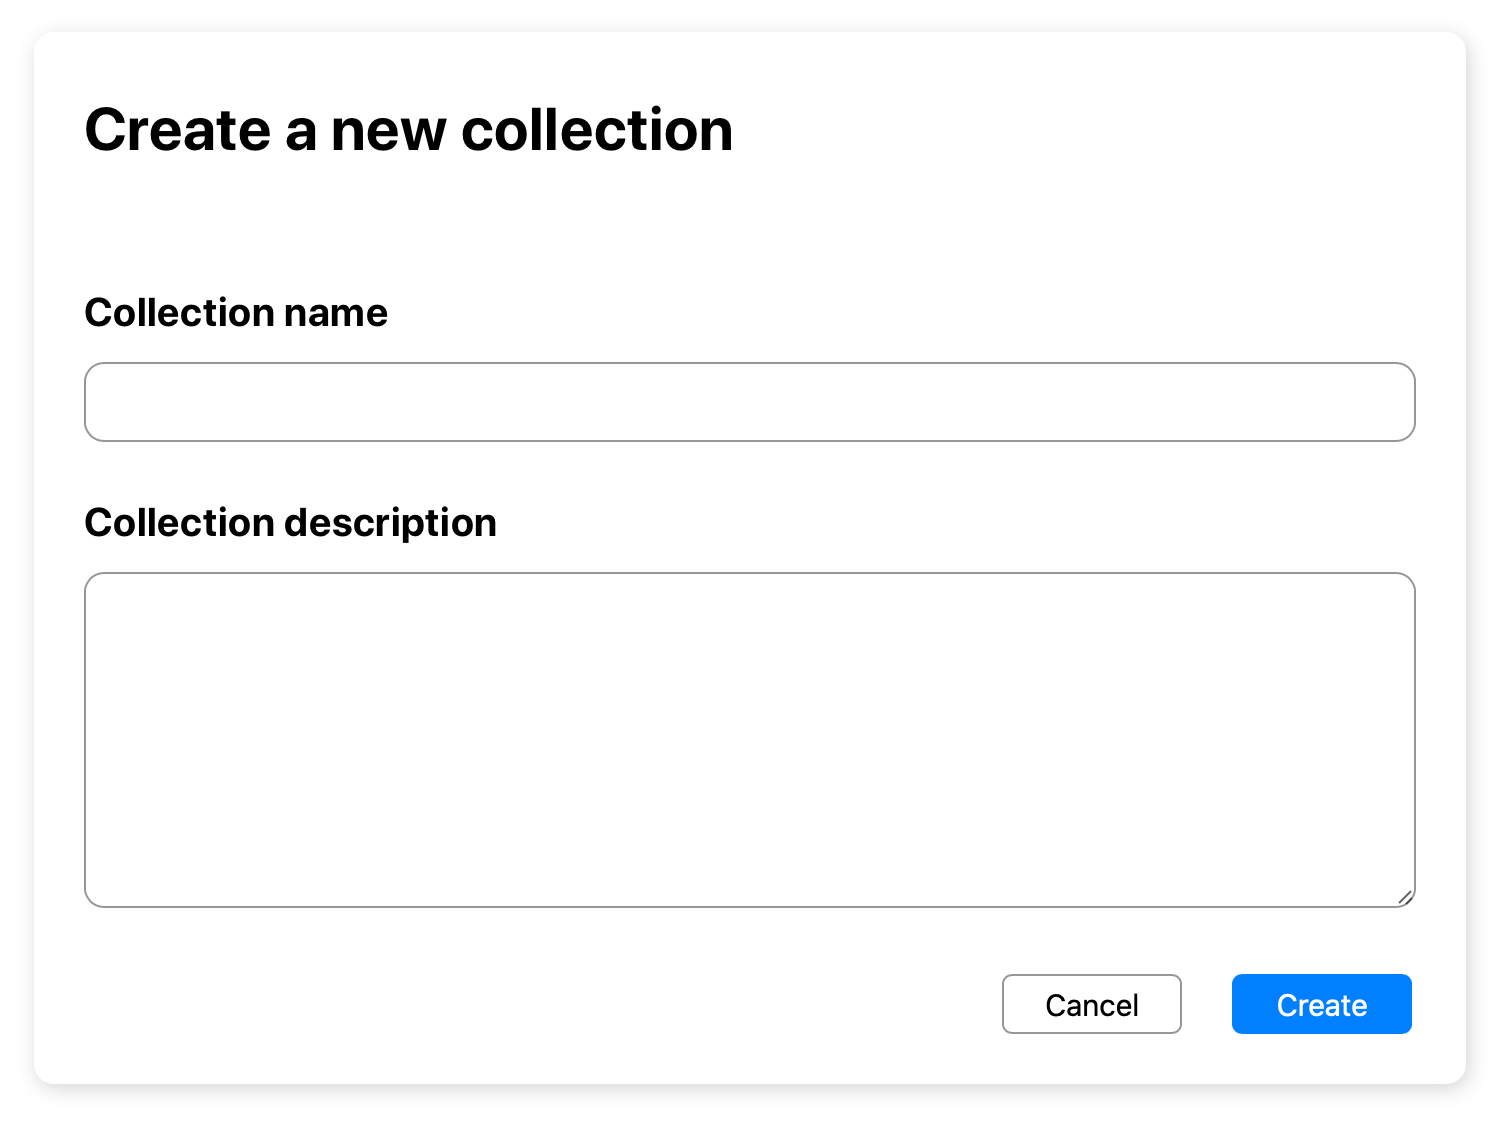 "Create a new collection" dialog window in Kinship.